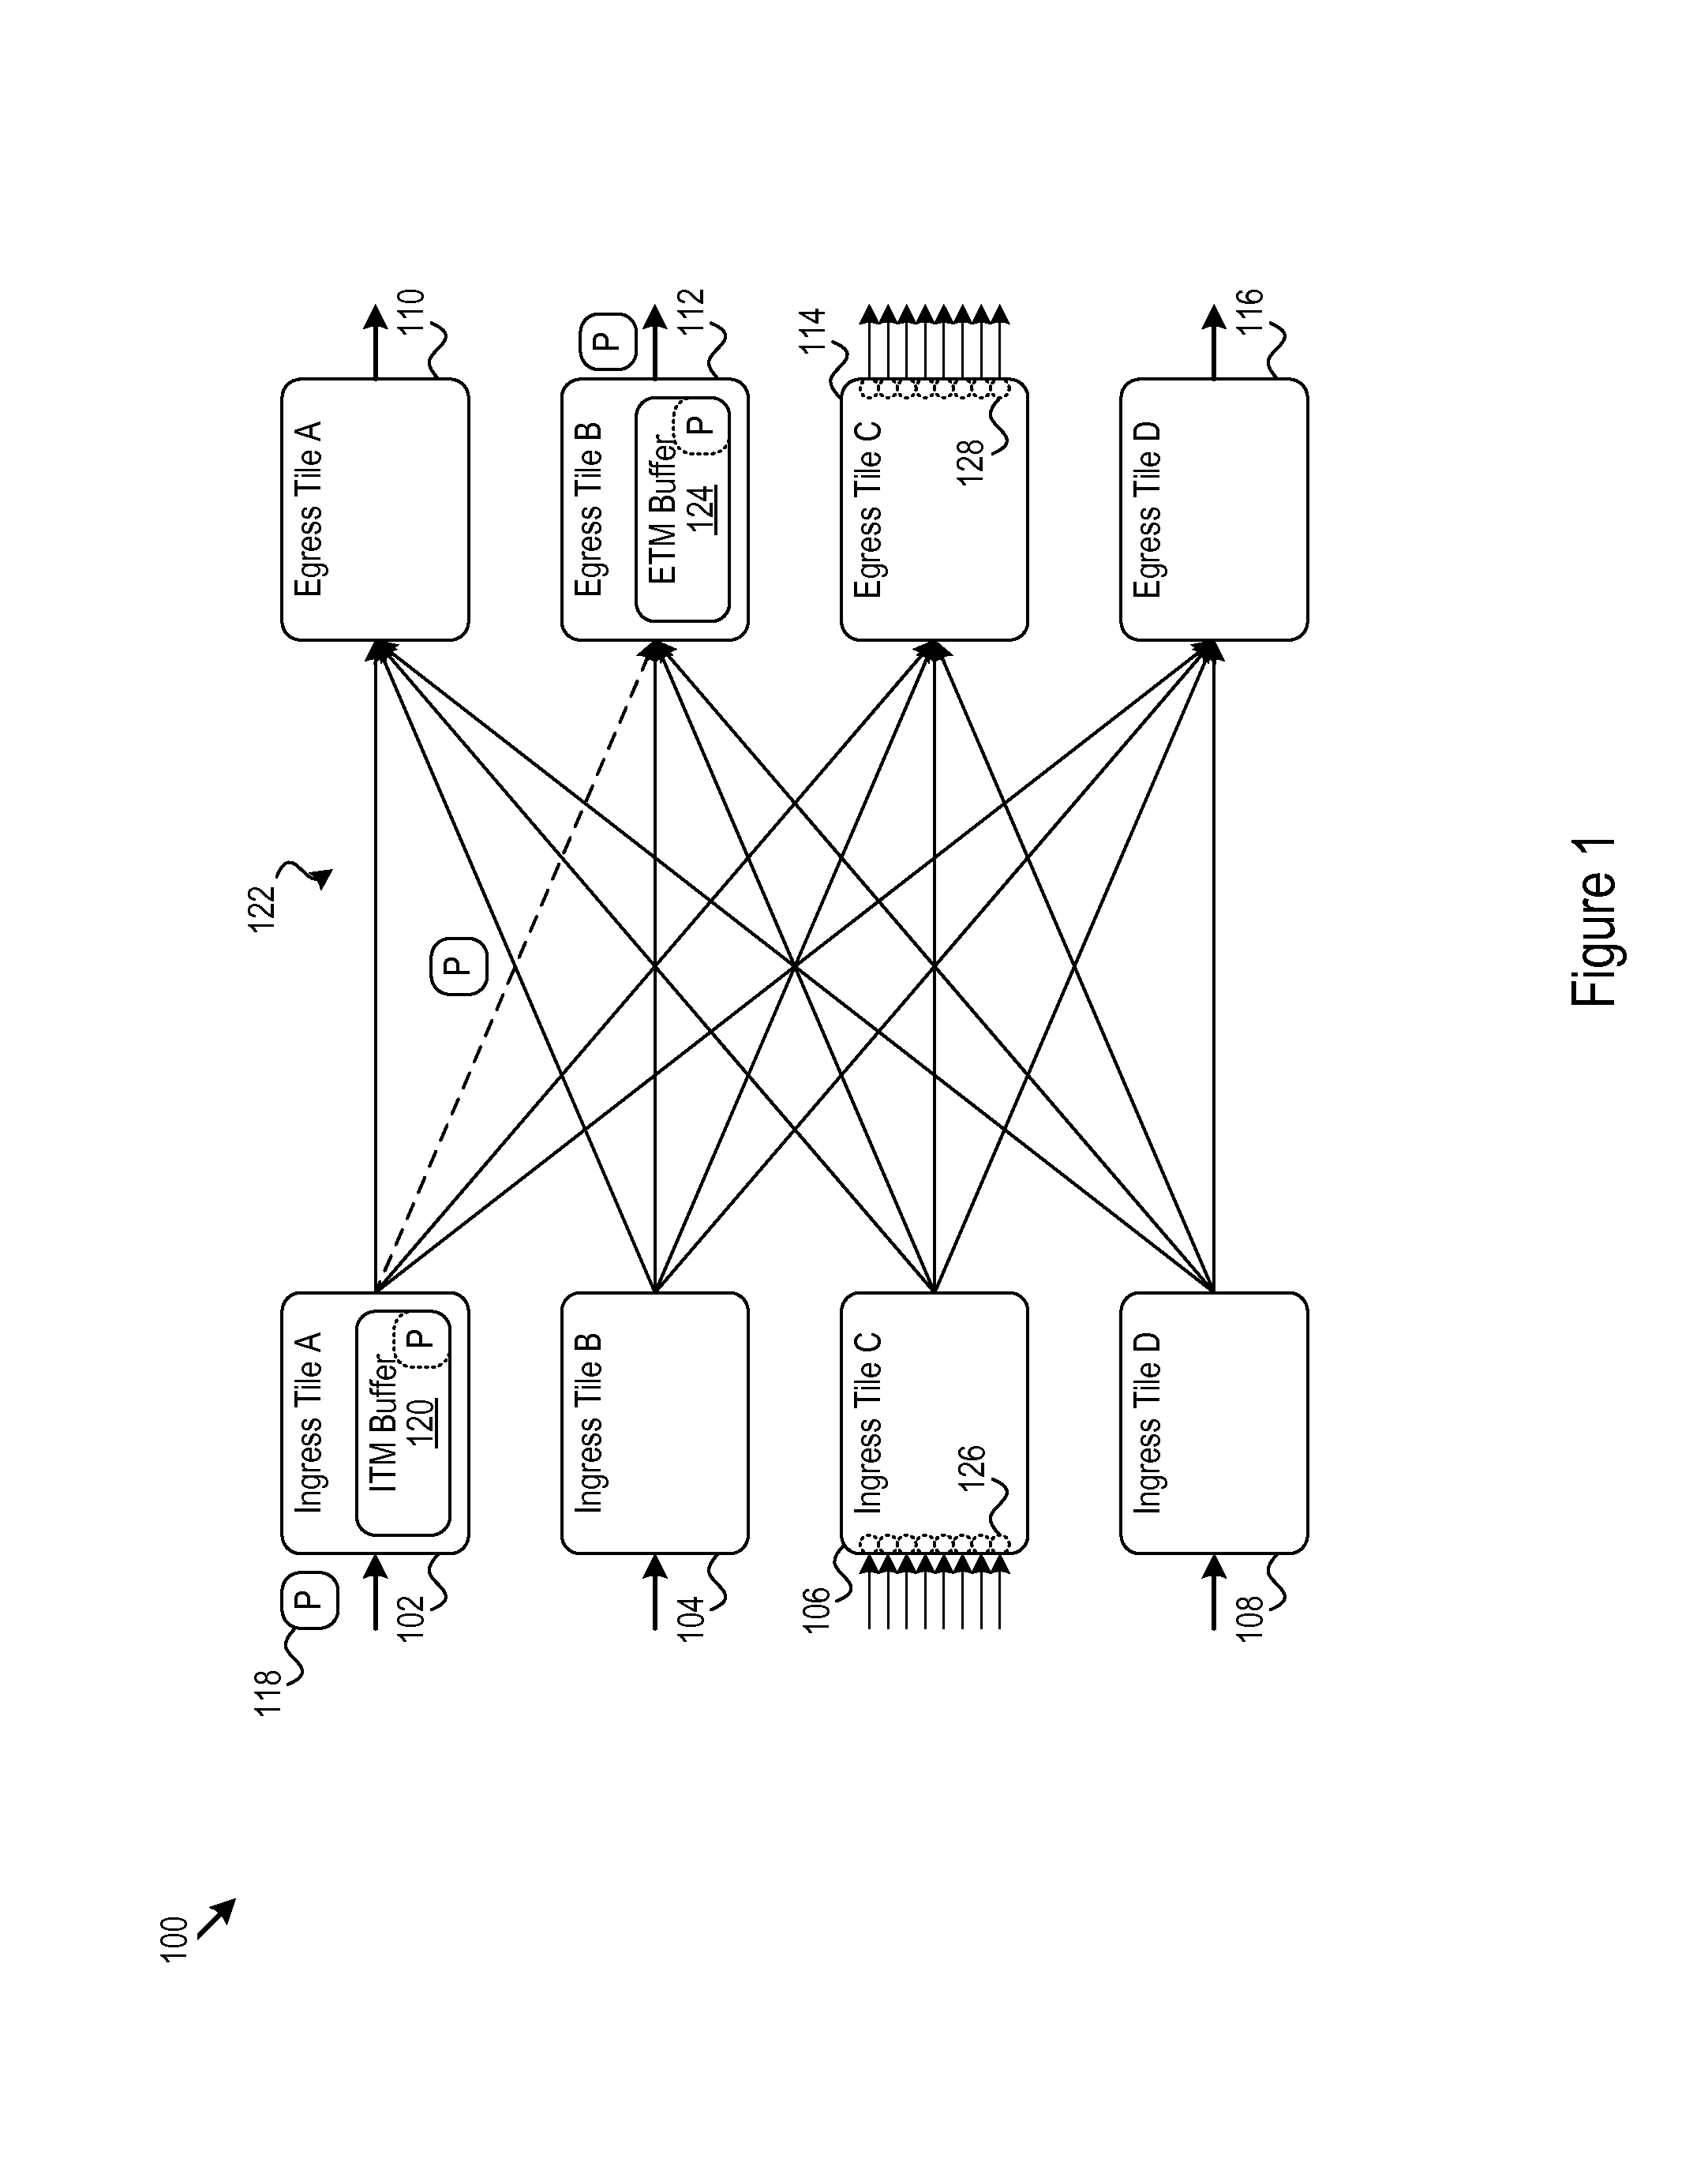 Internal Cut-Through For Distributed Switches